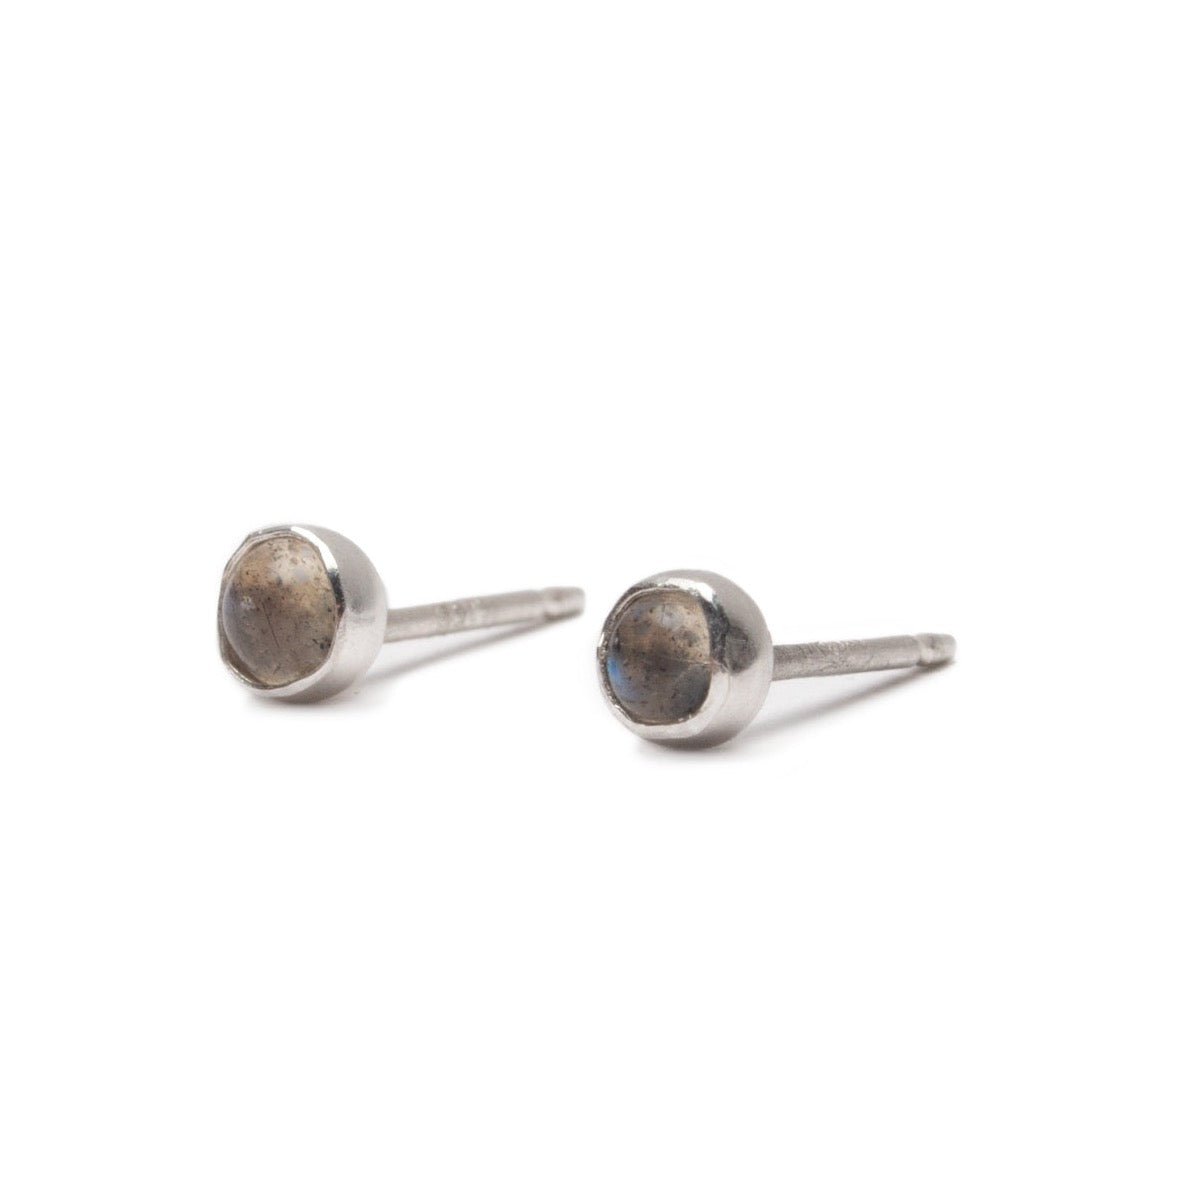 Sterling silver stud earrings with a shimmering labradorite focal stone. The Silver Labradorite Studs are designed and handcrafted by Deivi Arts Collective in Vancouver, Canada.